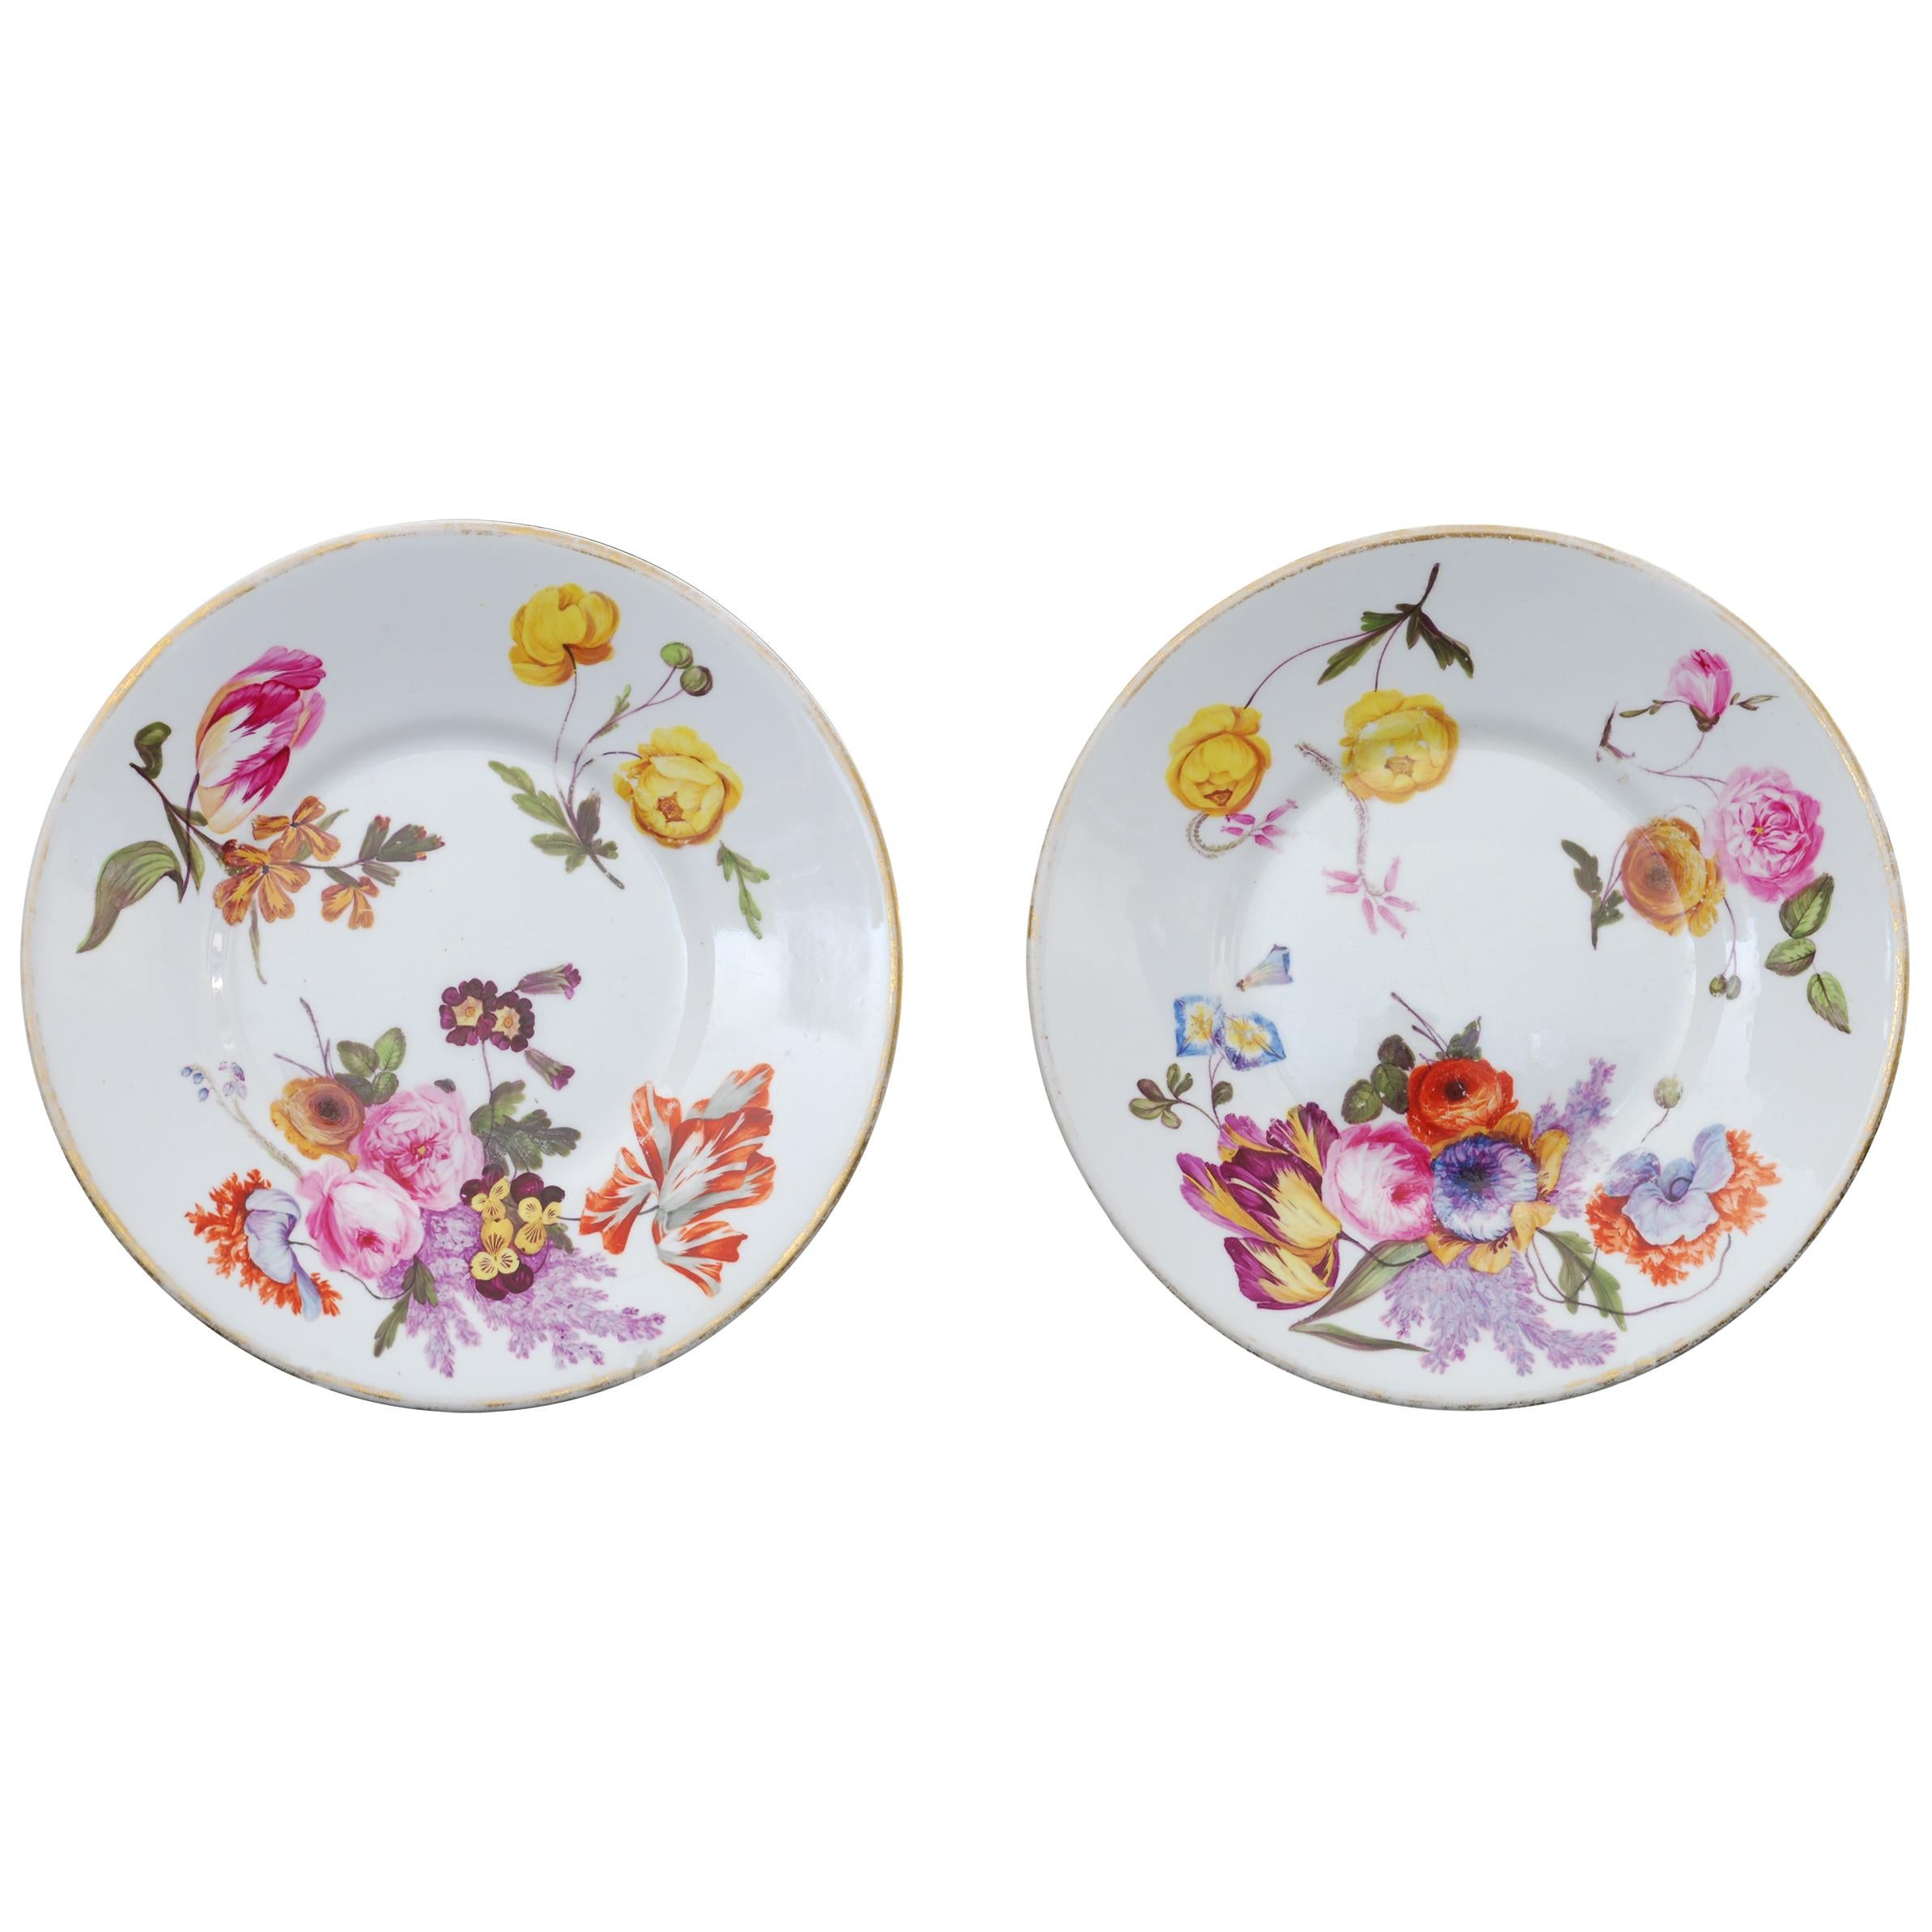 Pair of Bread and Butter Plates Nantgarw Porcelain, circa 1815 For Sale